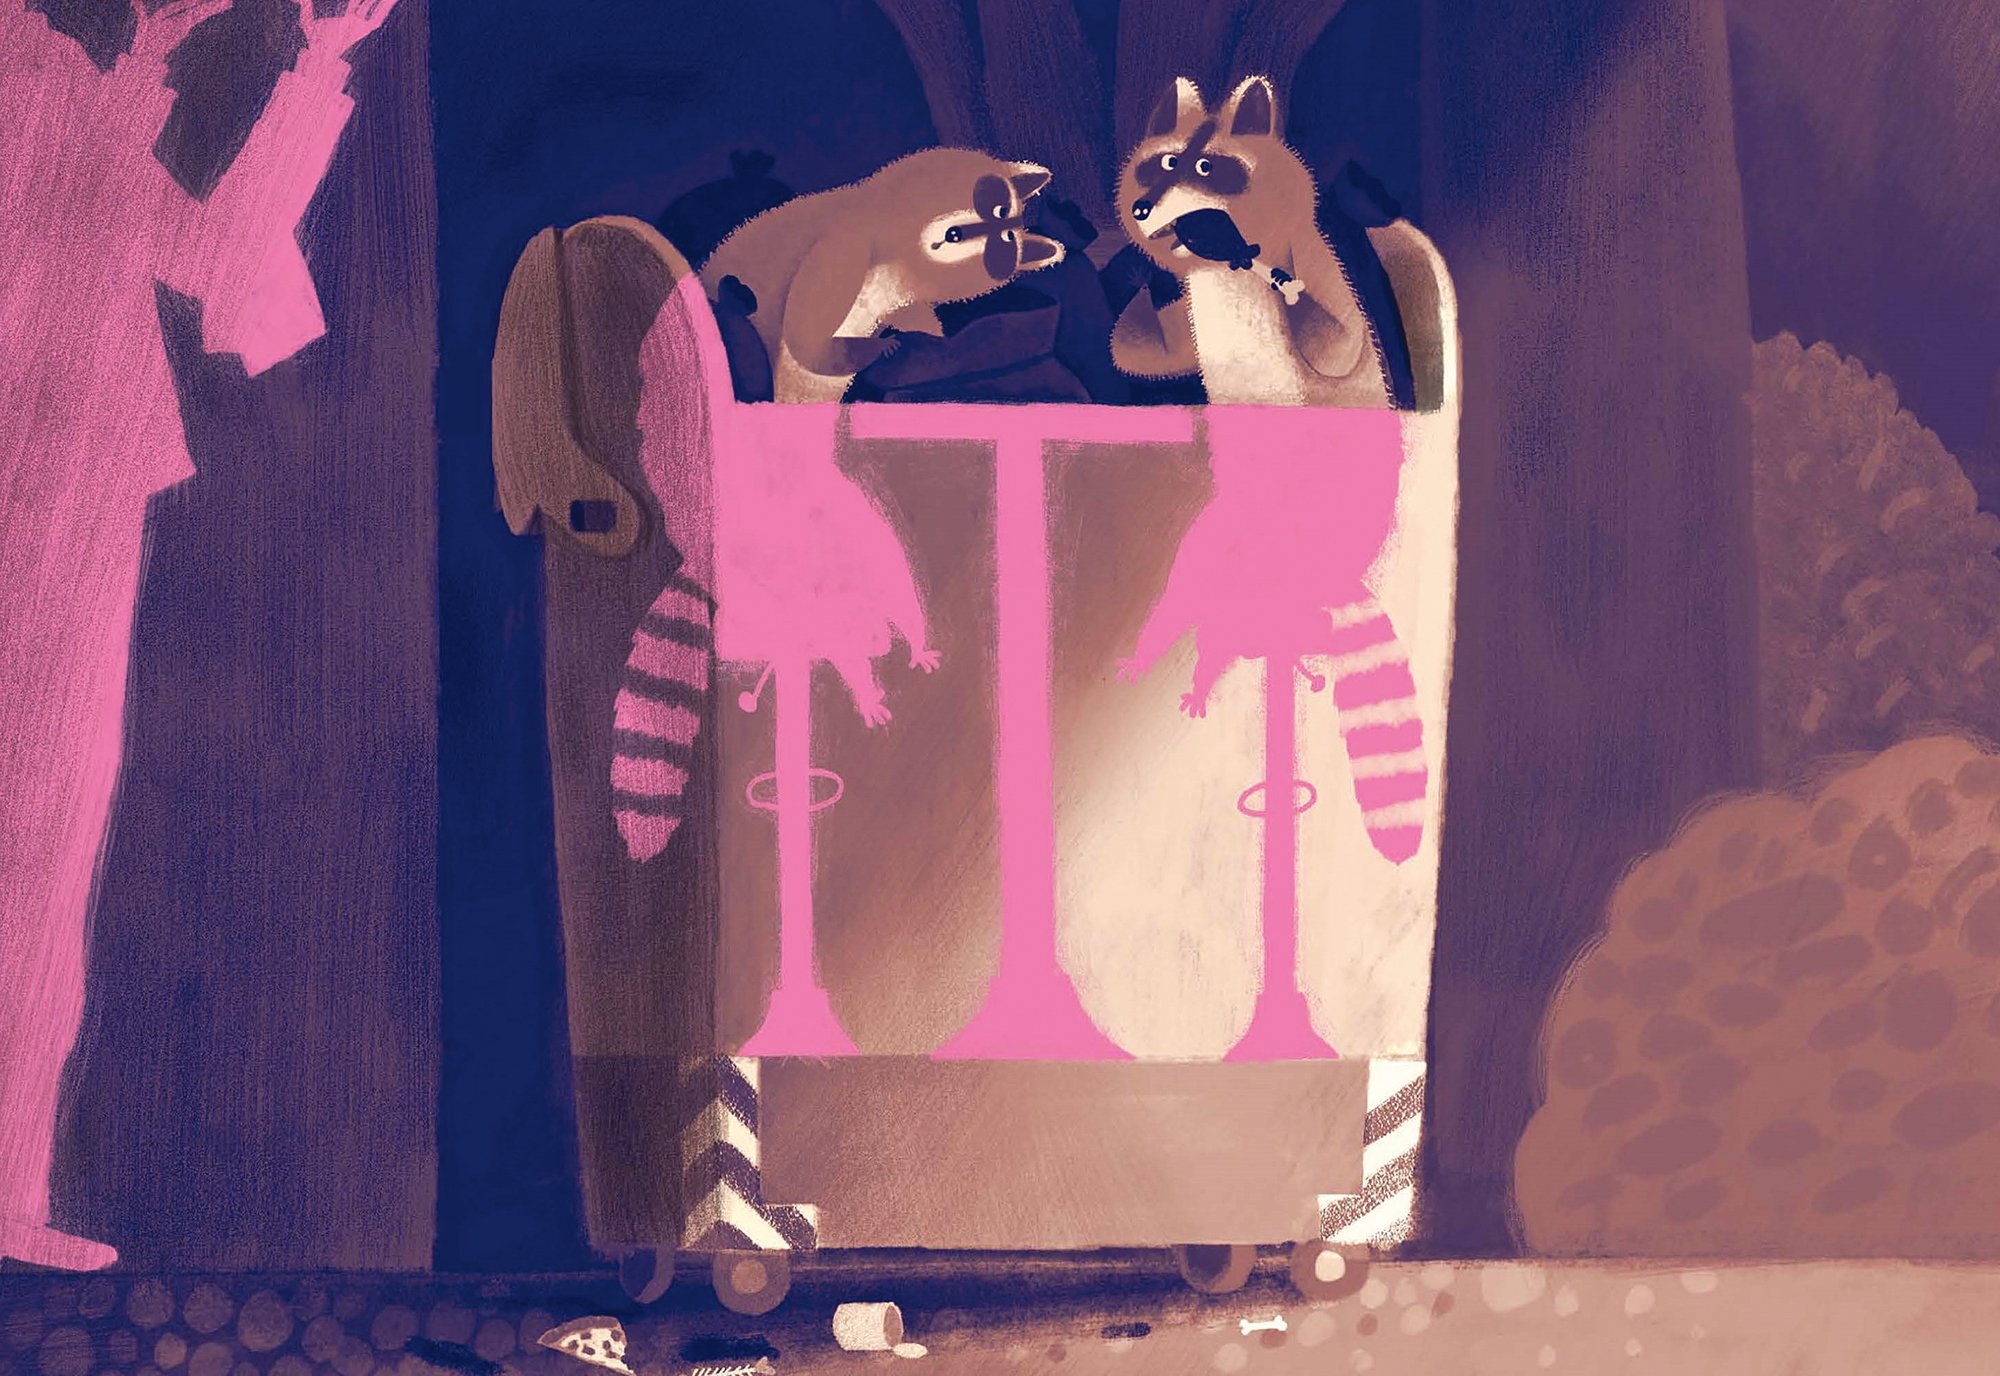 An illustration of raccoons in a dumpster